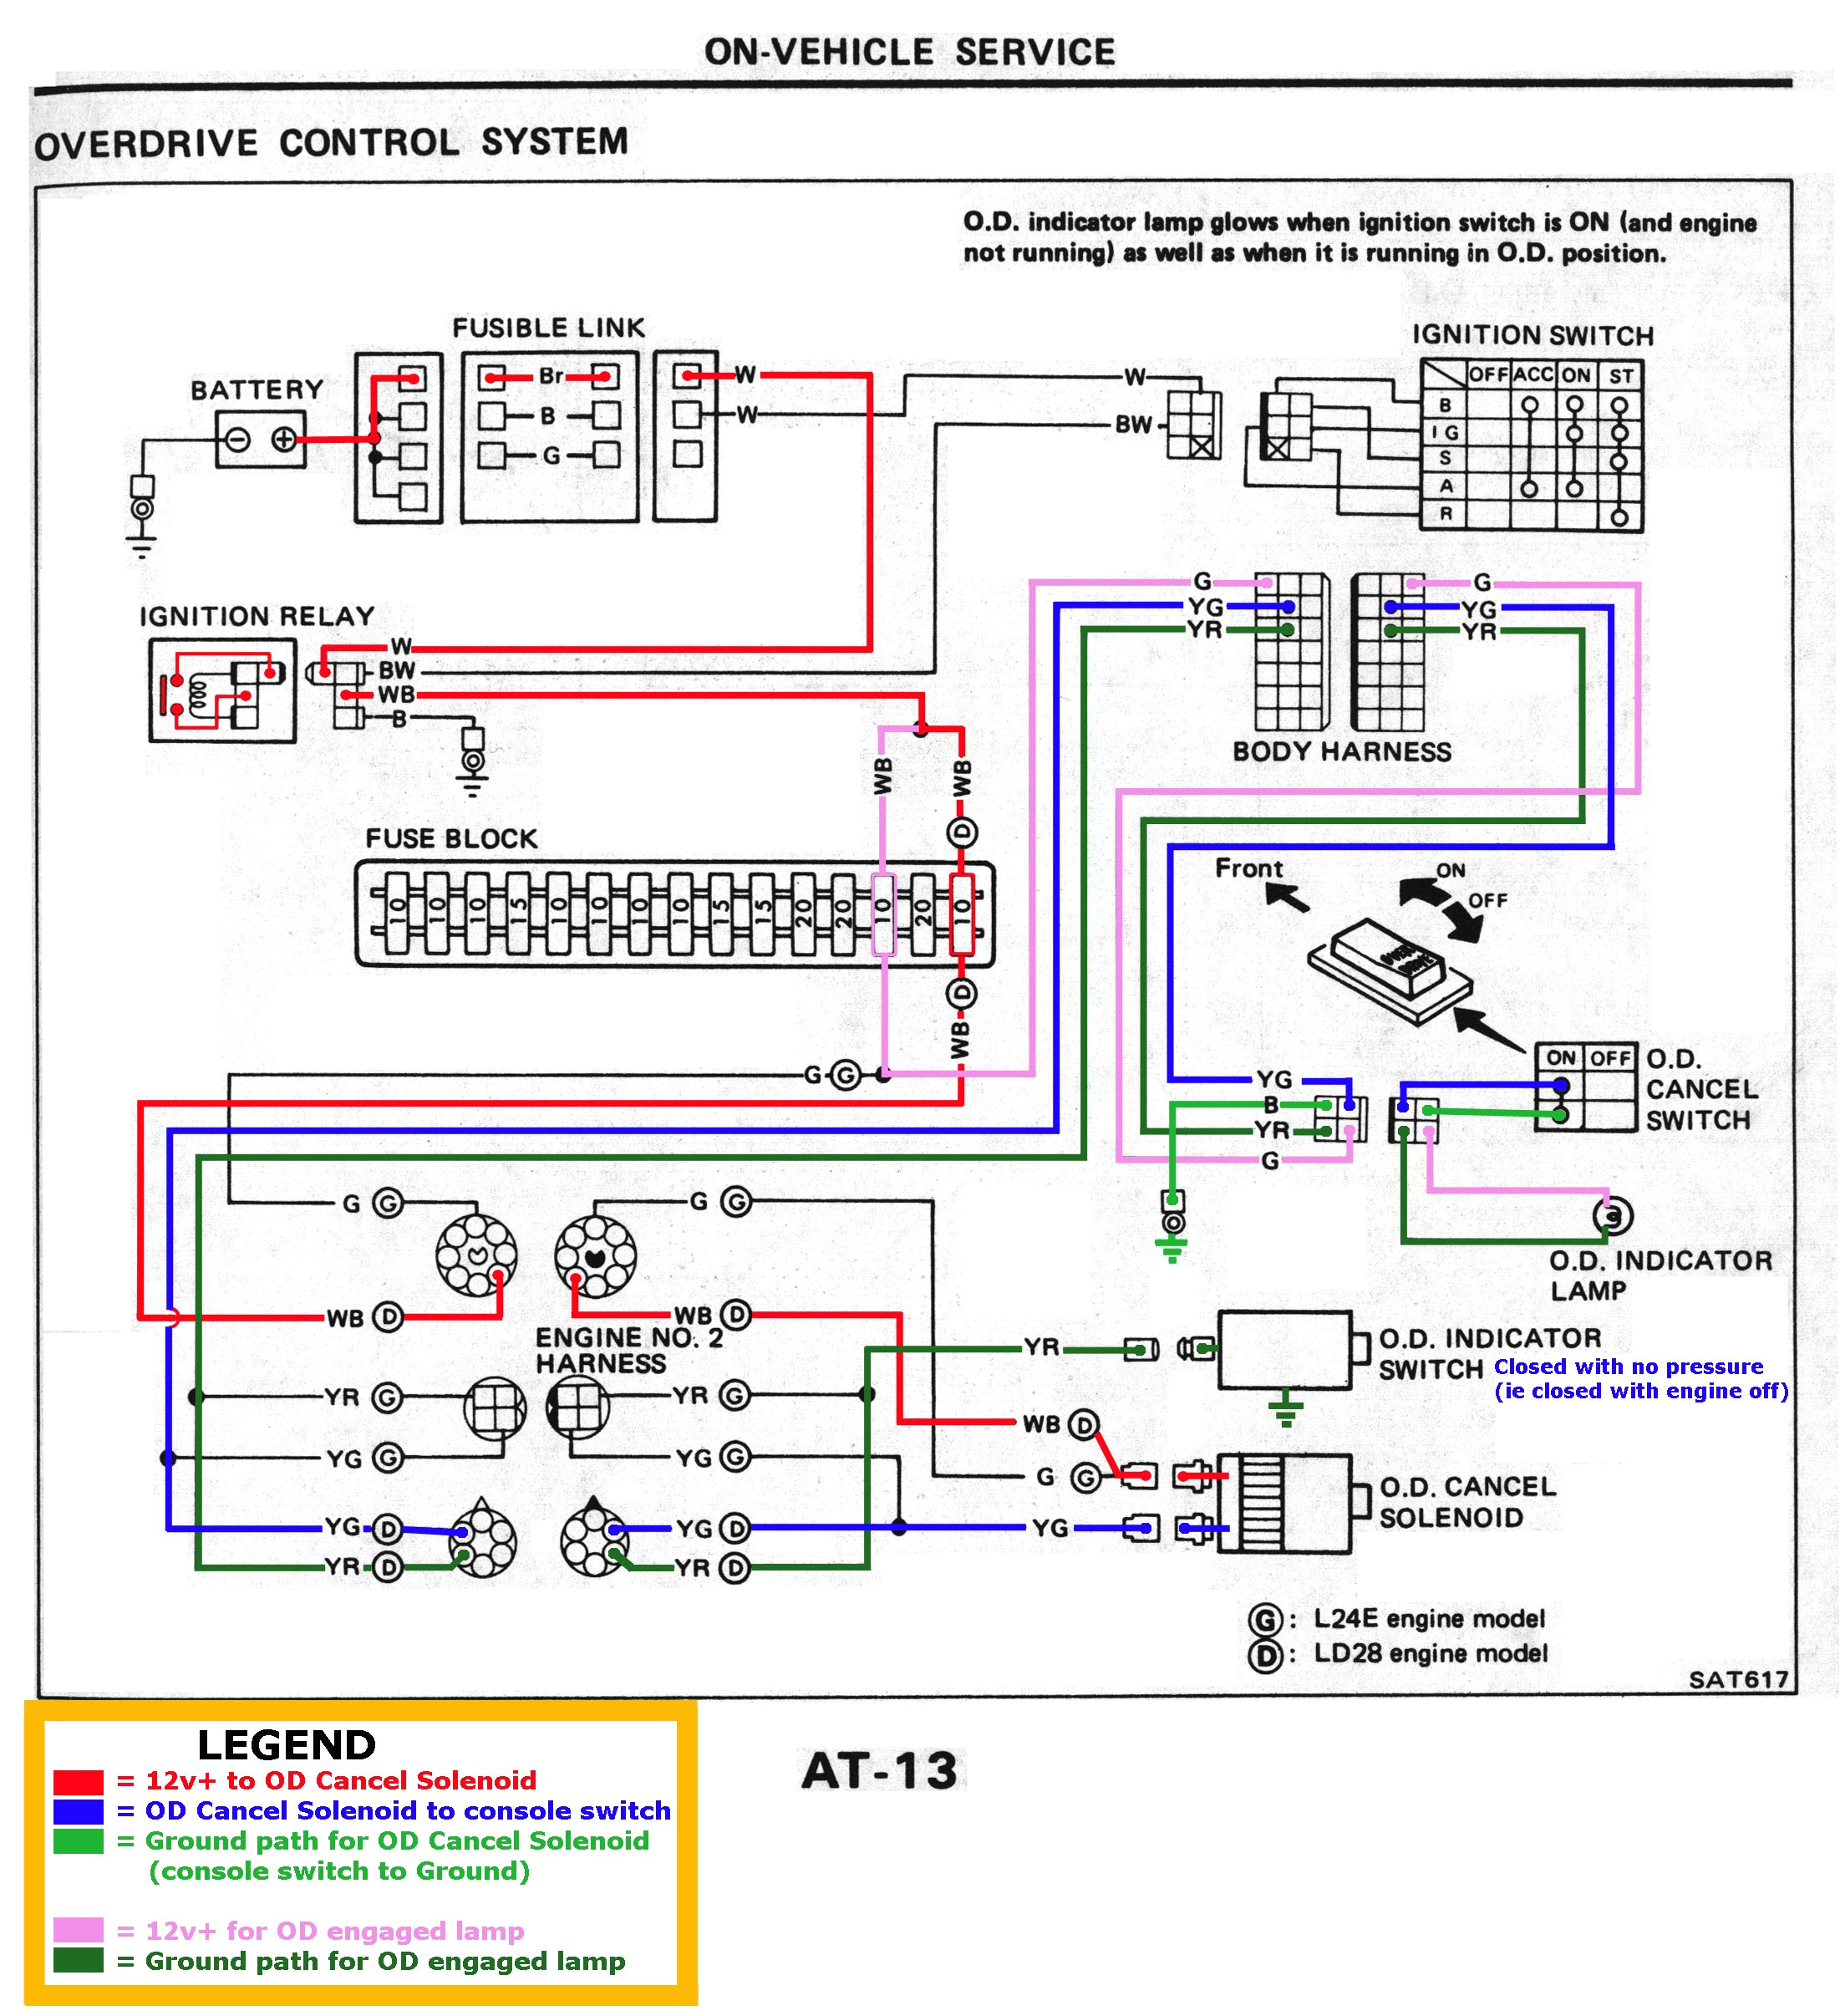 1998 Nissan Maxima Wiring Diagram Electrical System 1998 Nissan Maxima Wiring Diagram Electrical System Architecture